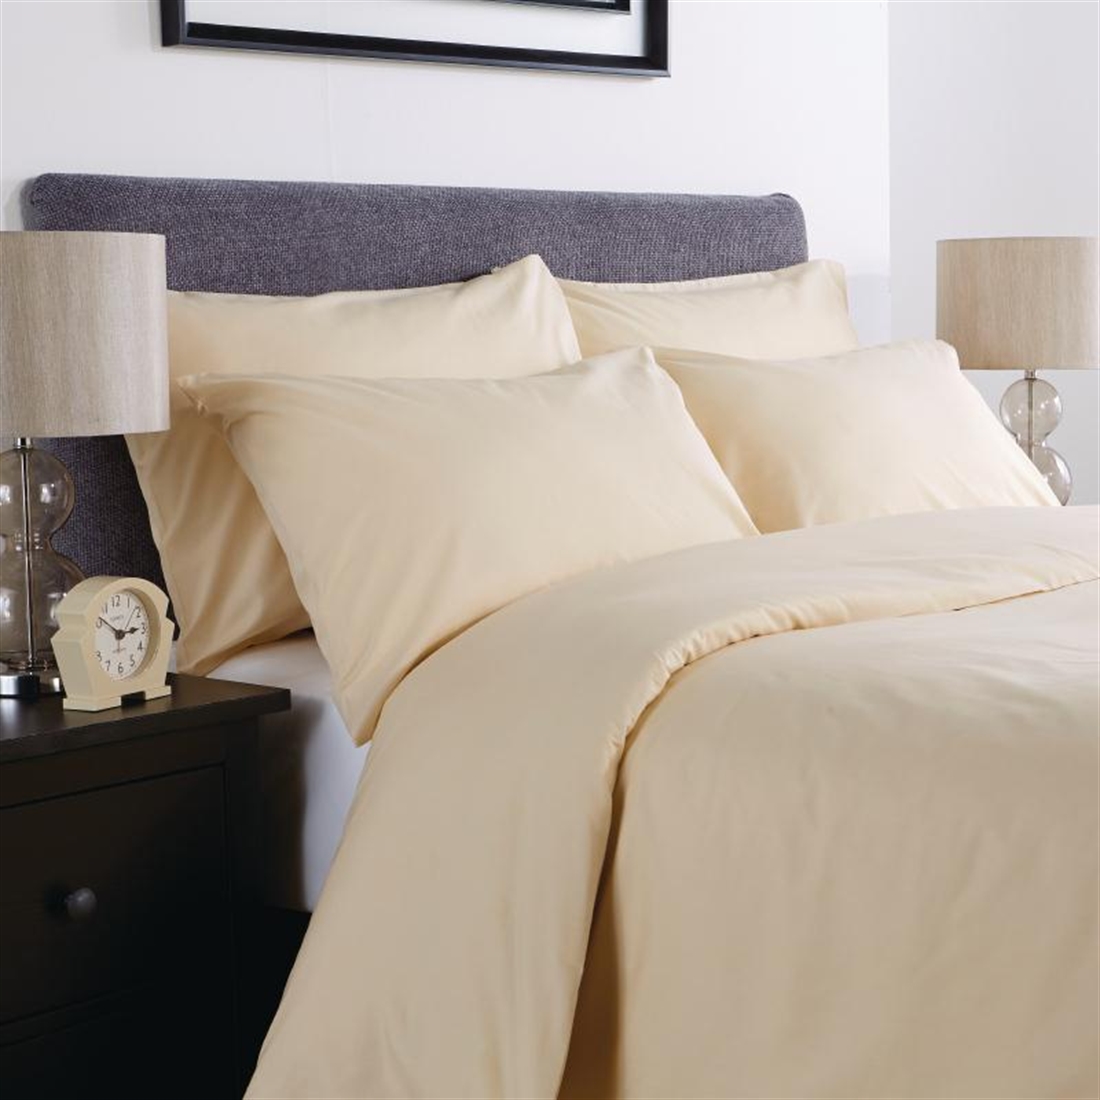 Mitre Comfort Percale Housewife Pillowcase Oatmeal